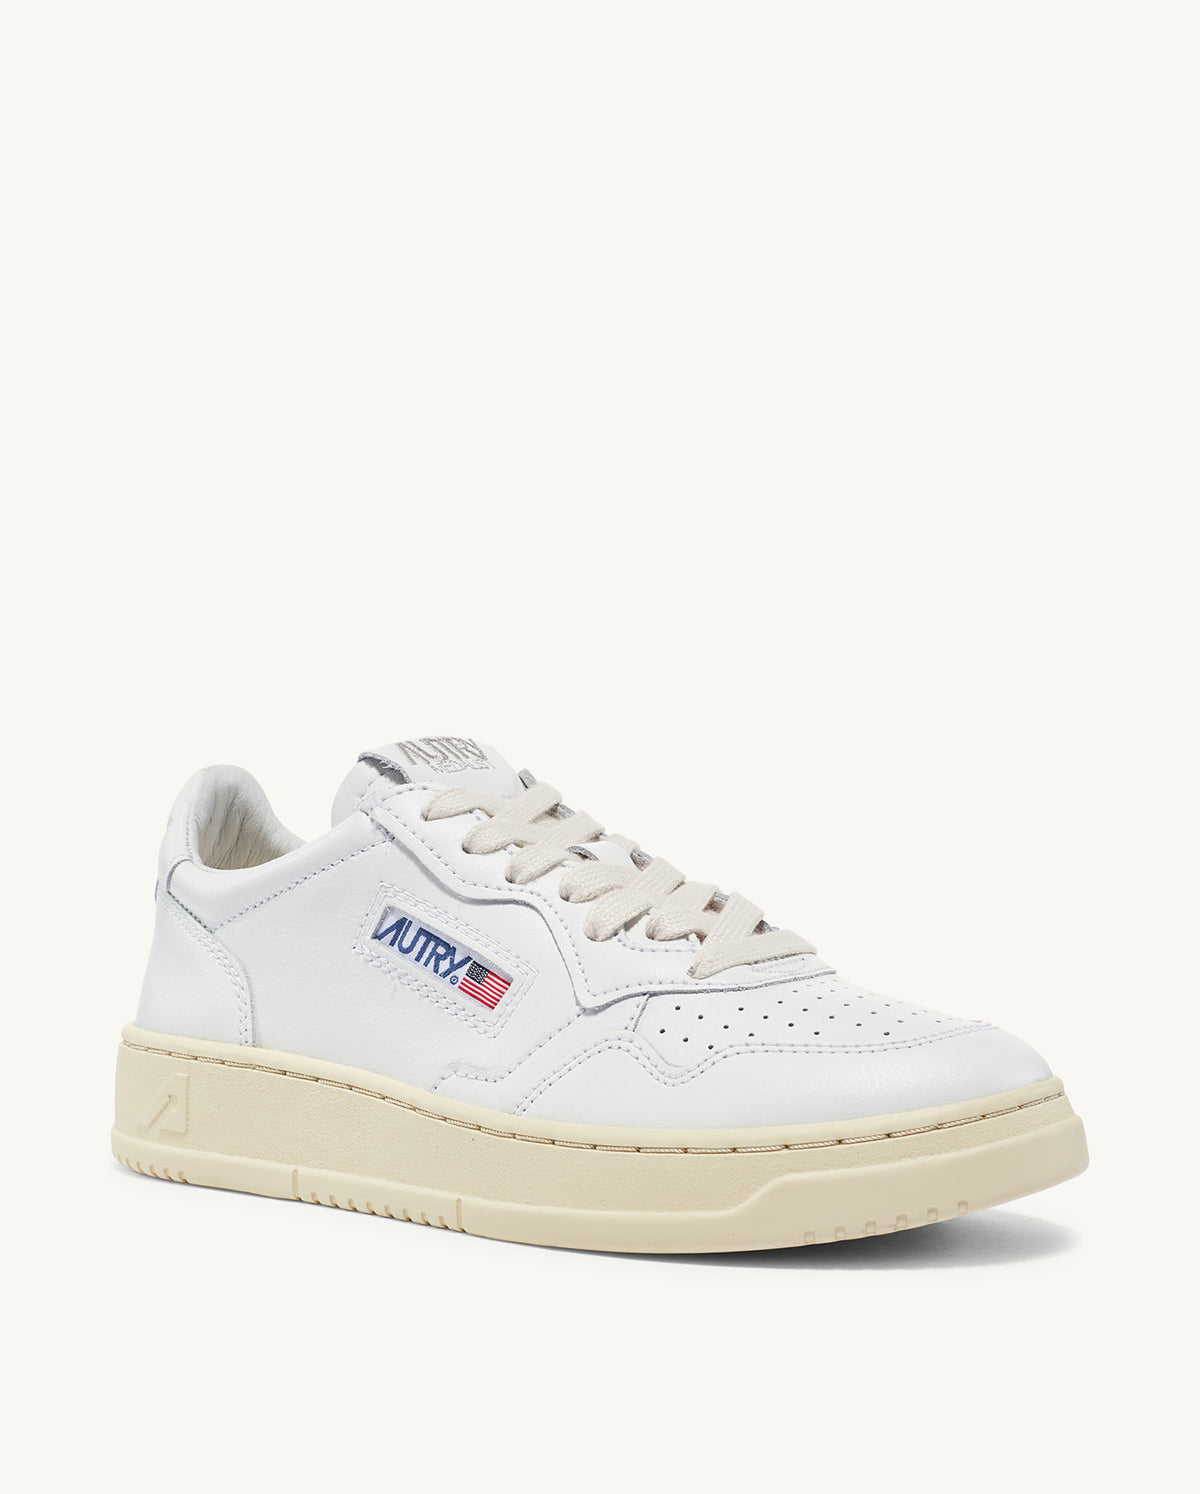 Medalist Low Leather Sneaker - White